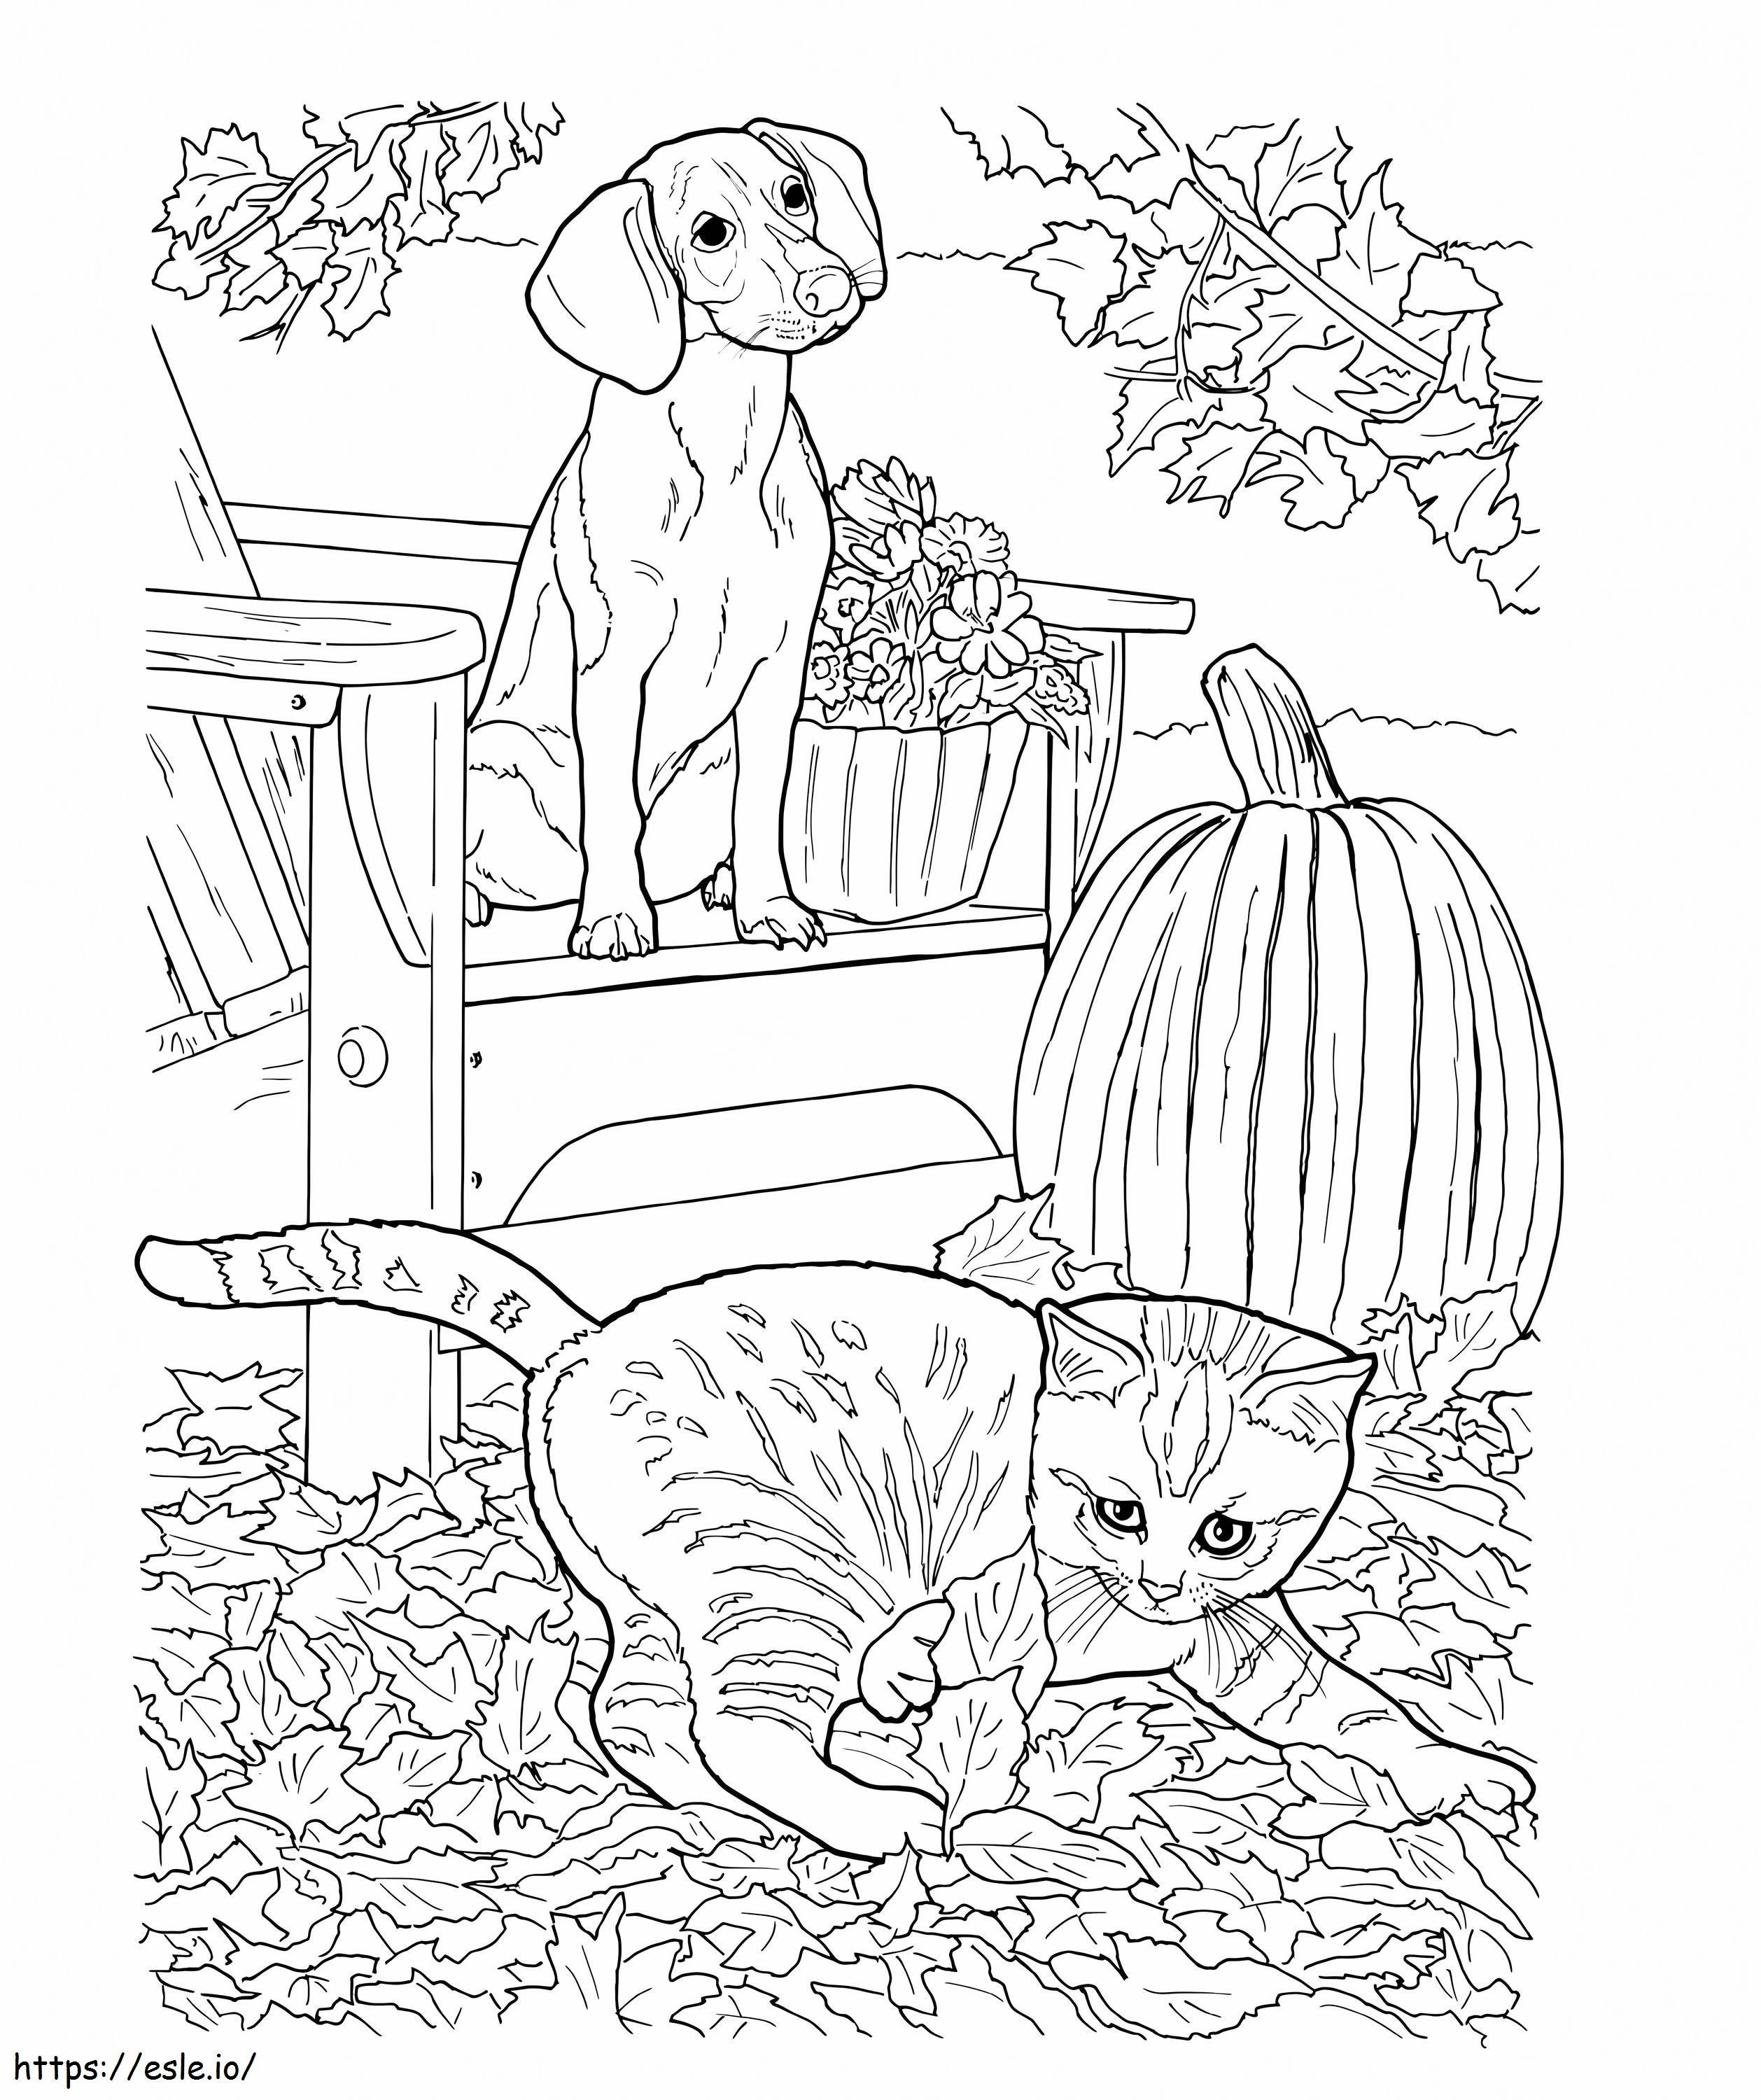 Realistic Dog And Cat coloring page